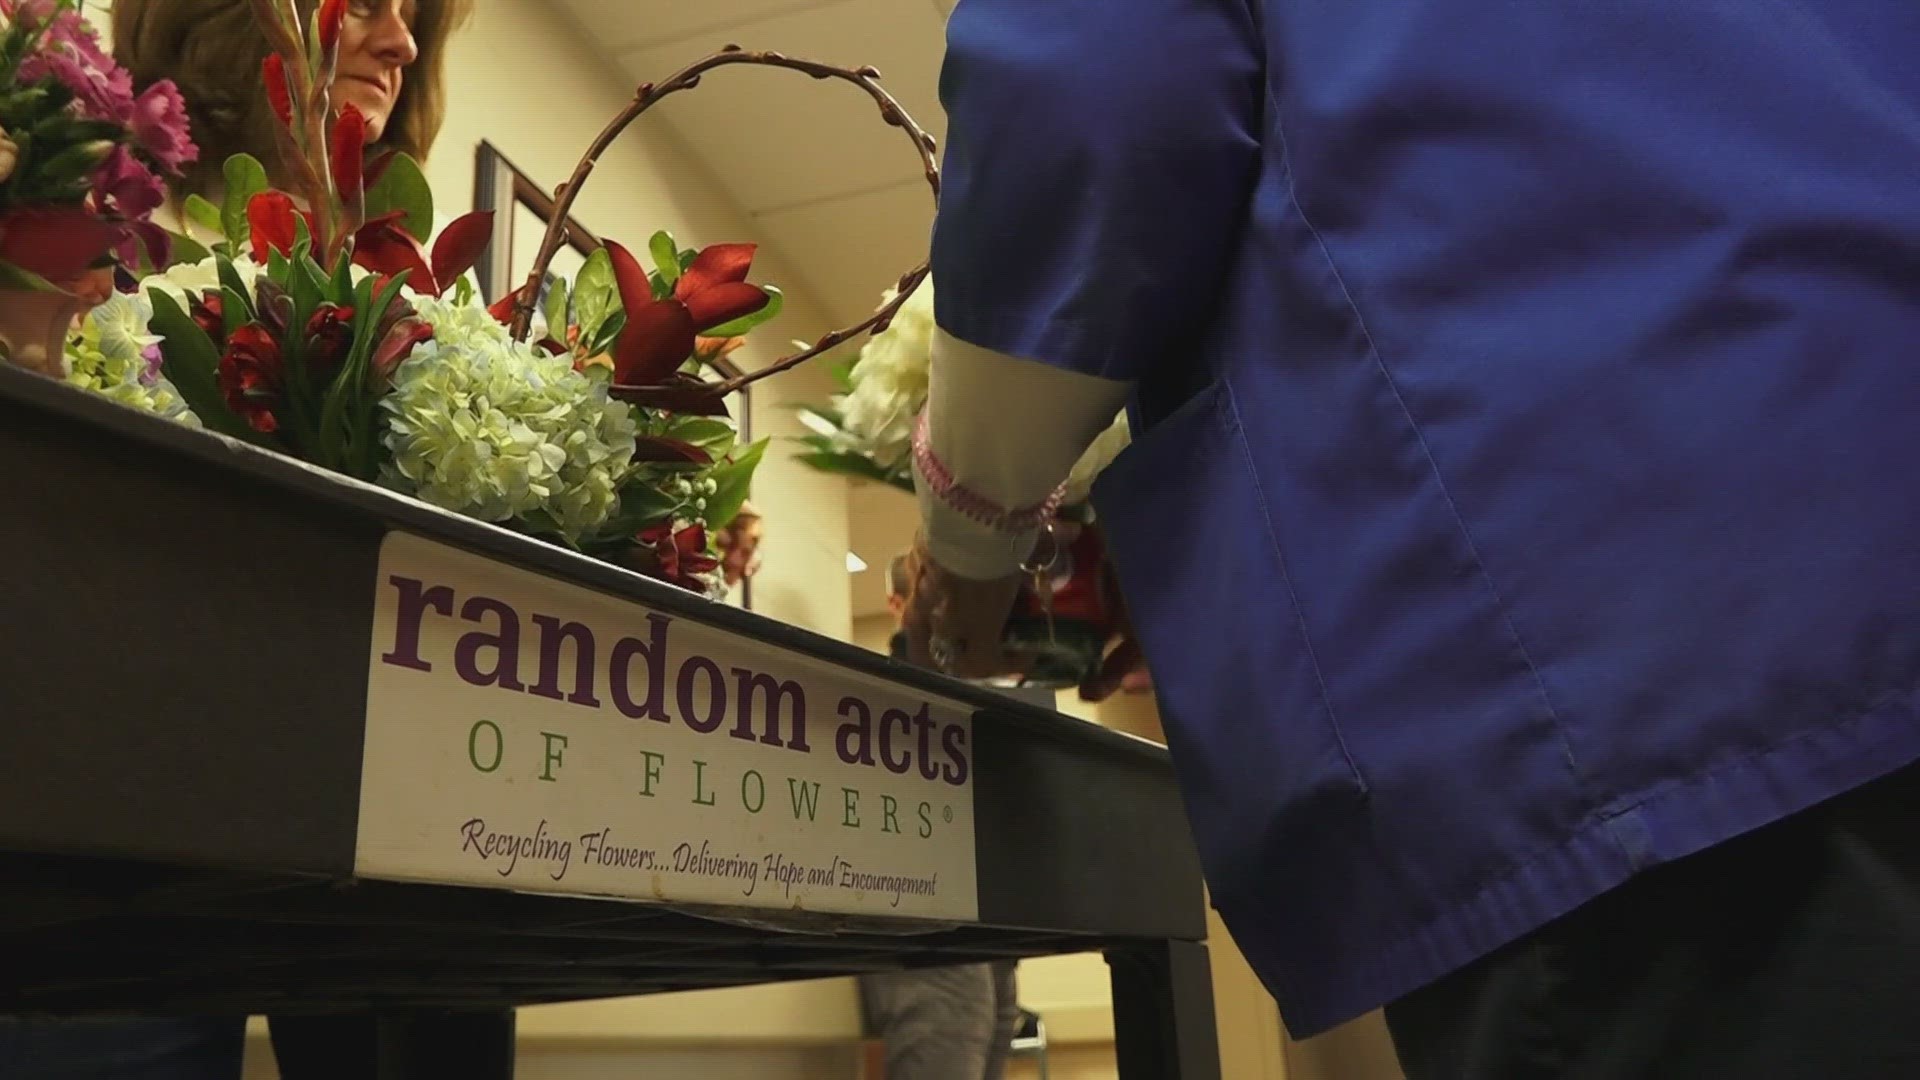 Random Acts of Flowers delivered bouquets to people in the hospital, celebrating National Random Acts of Kindness Day.